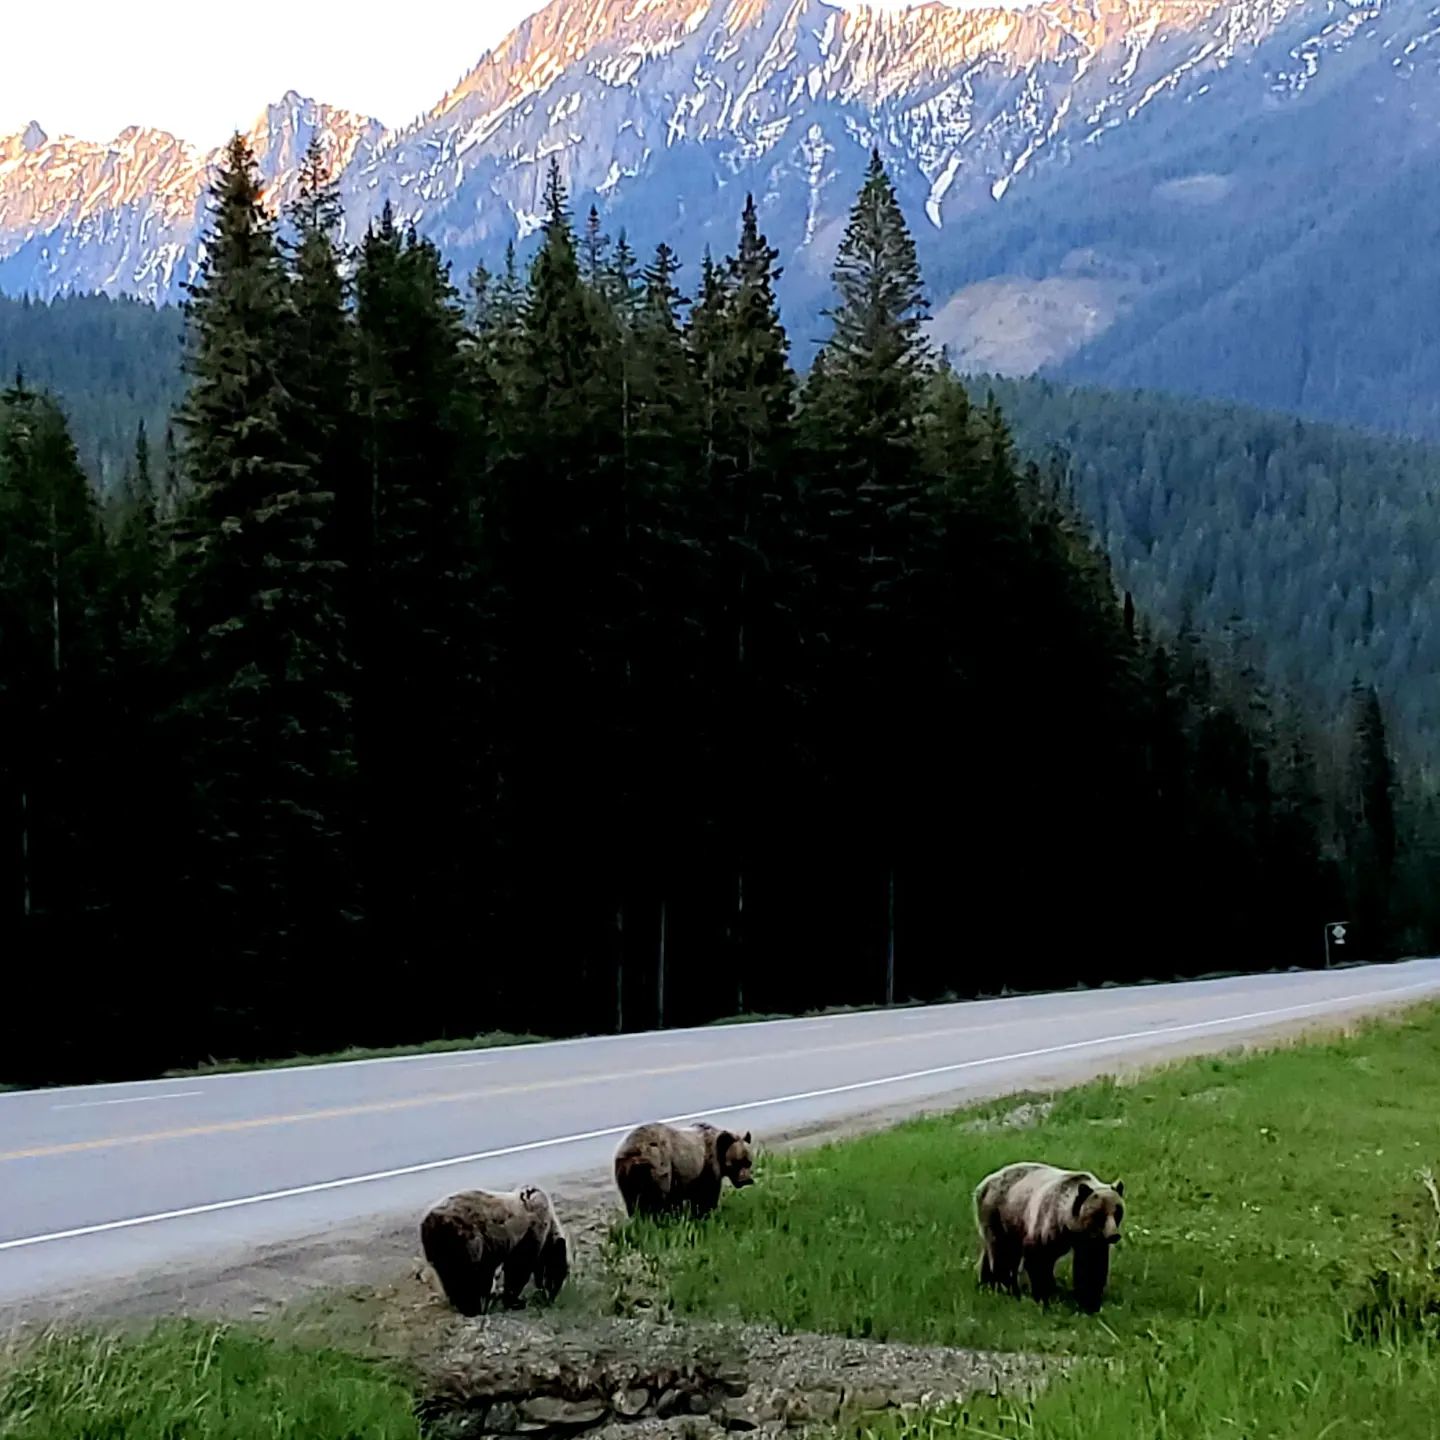 We had no problem letting this threesome play through. HA! Three Grizzlies strolling along the highway or anywhere else they want to go. Amazing animals. #grizzlies #alberta #golftrips #golf #nature #beautifuldestinations #travel #instacool #instagolf #vacations #canada #beardown